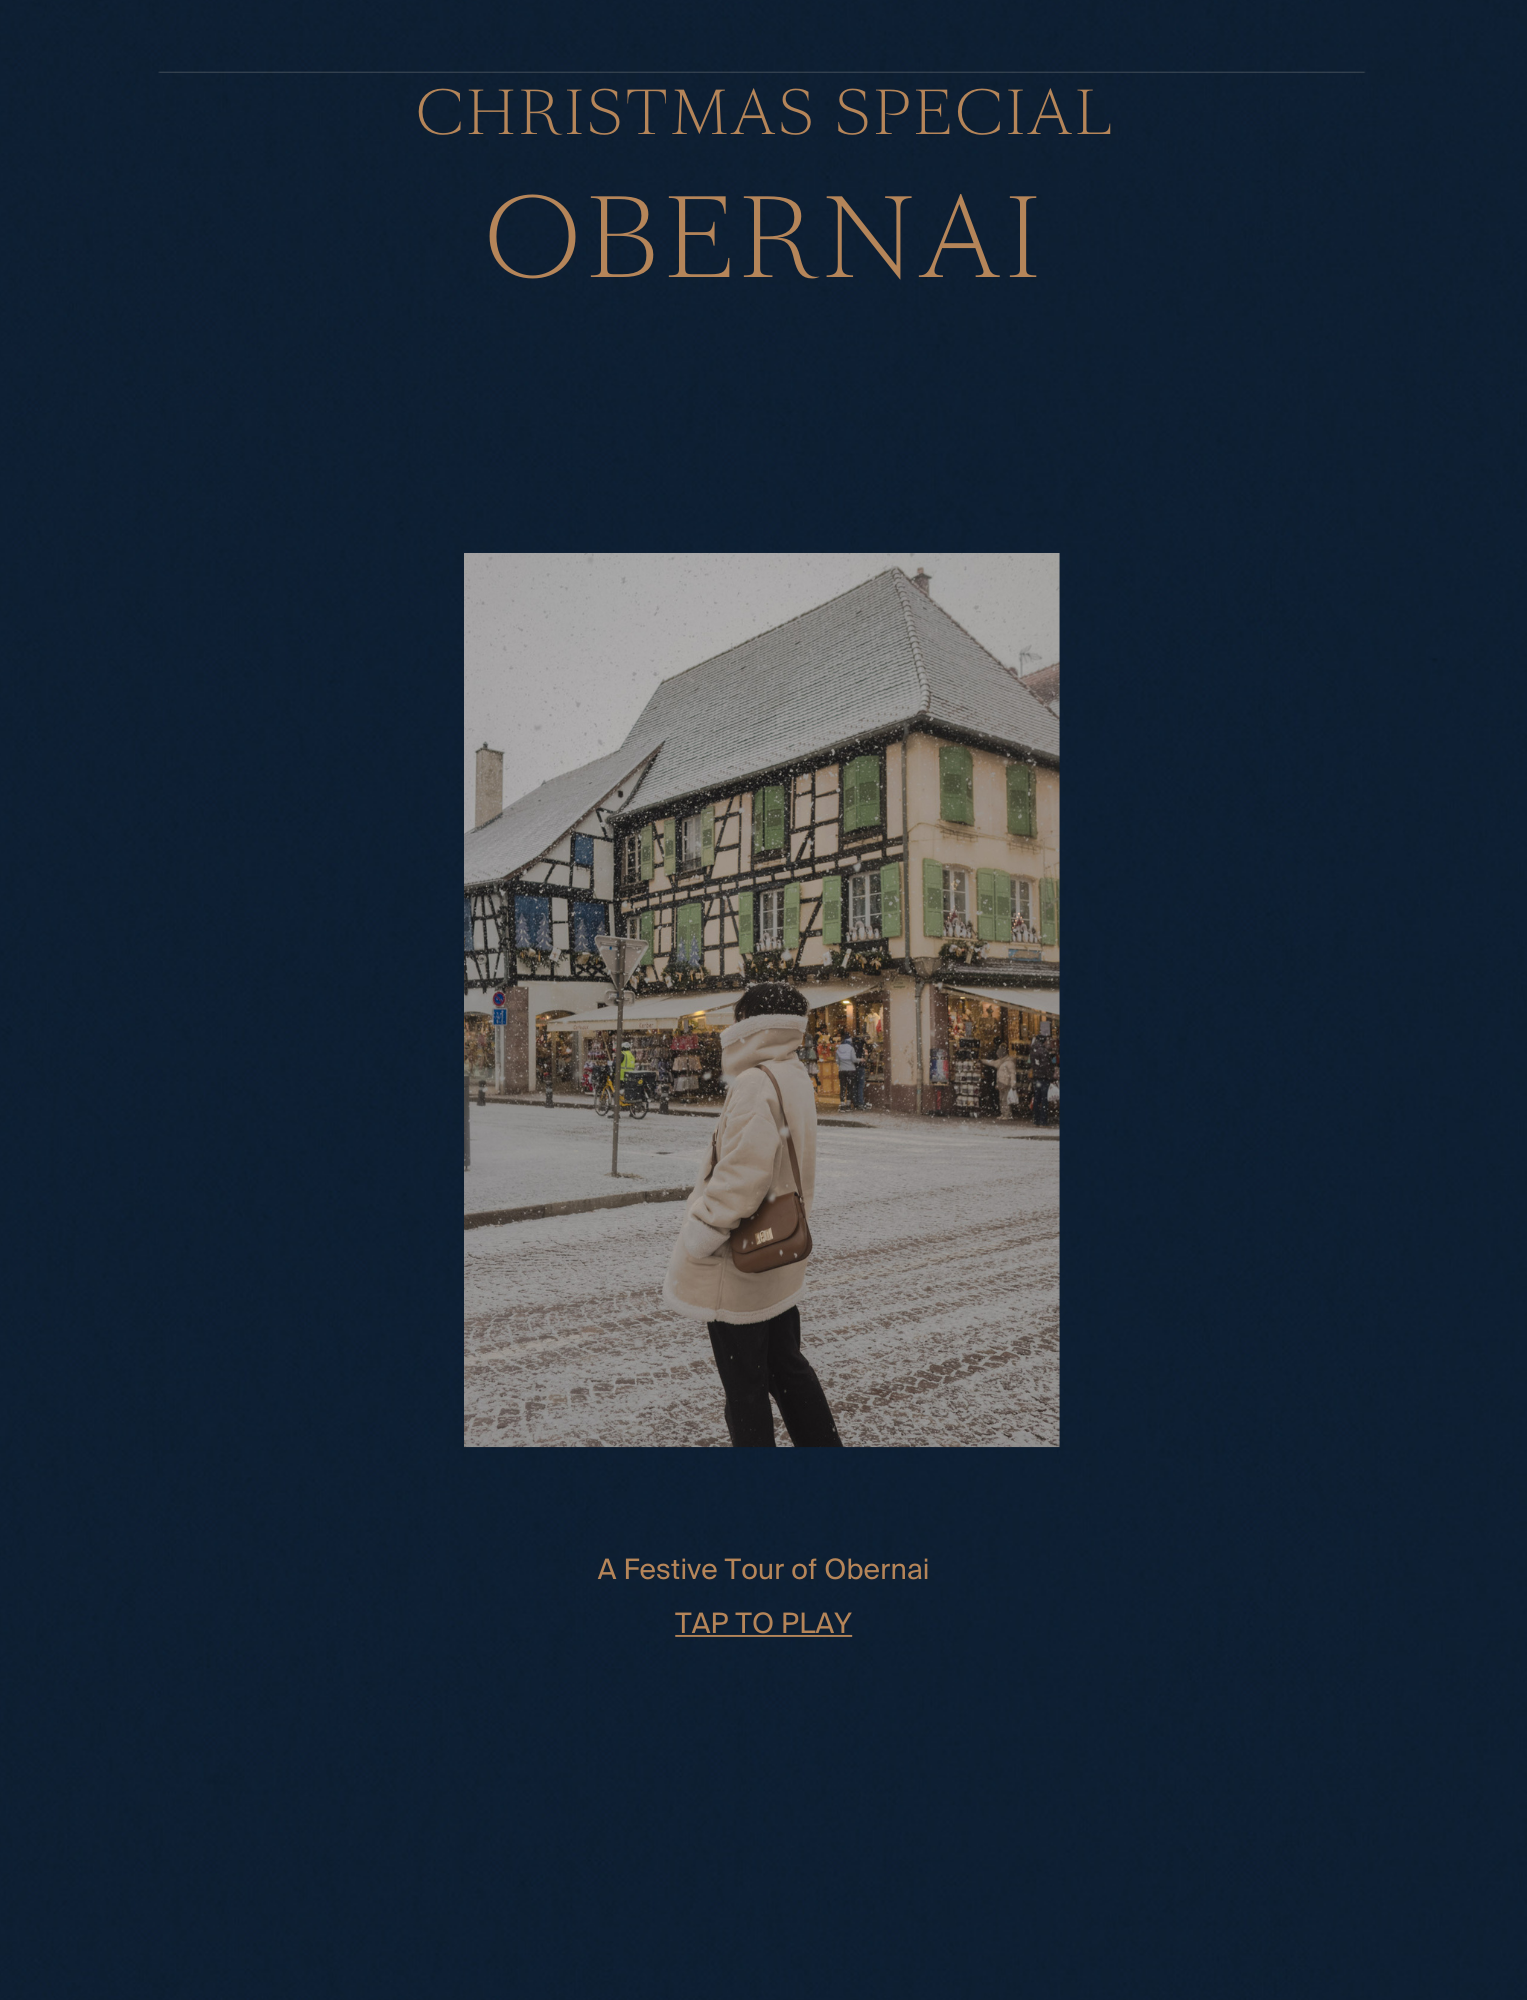 A Guide to Alsace, Christmas Edition - the cover page of Obernai, by Simply Slow Traveler